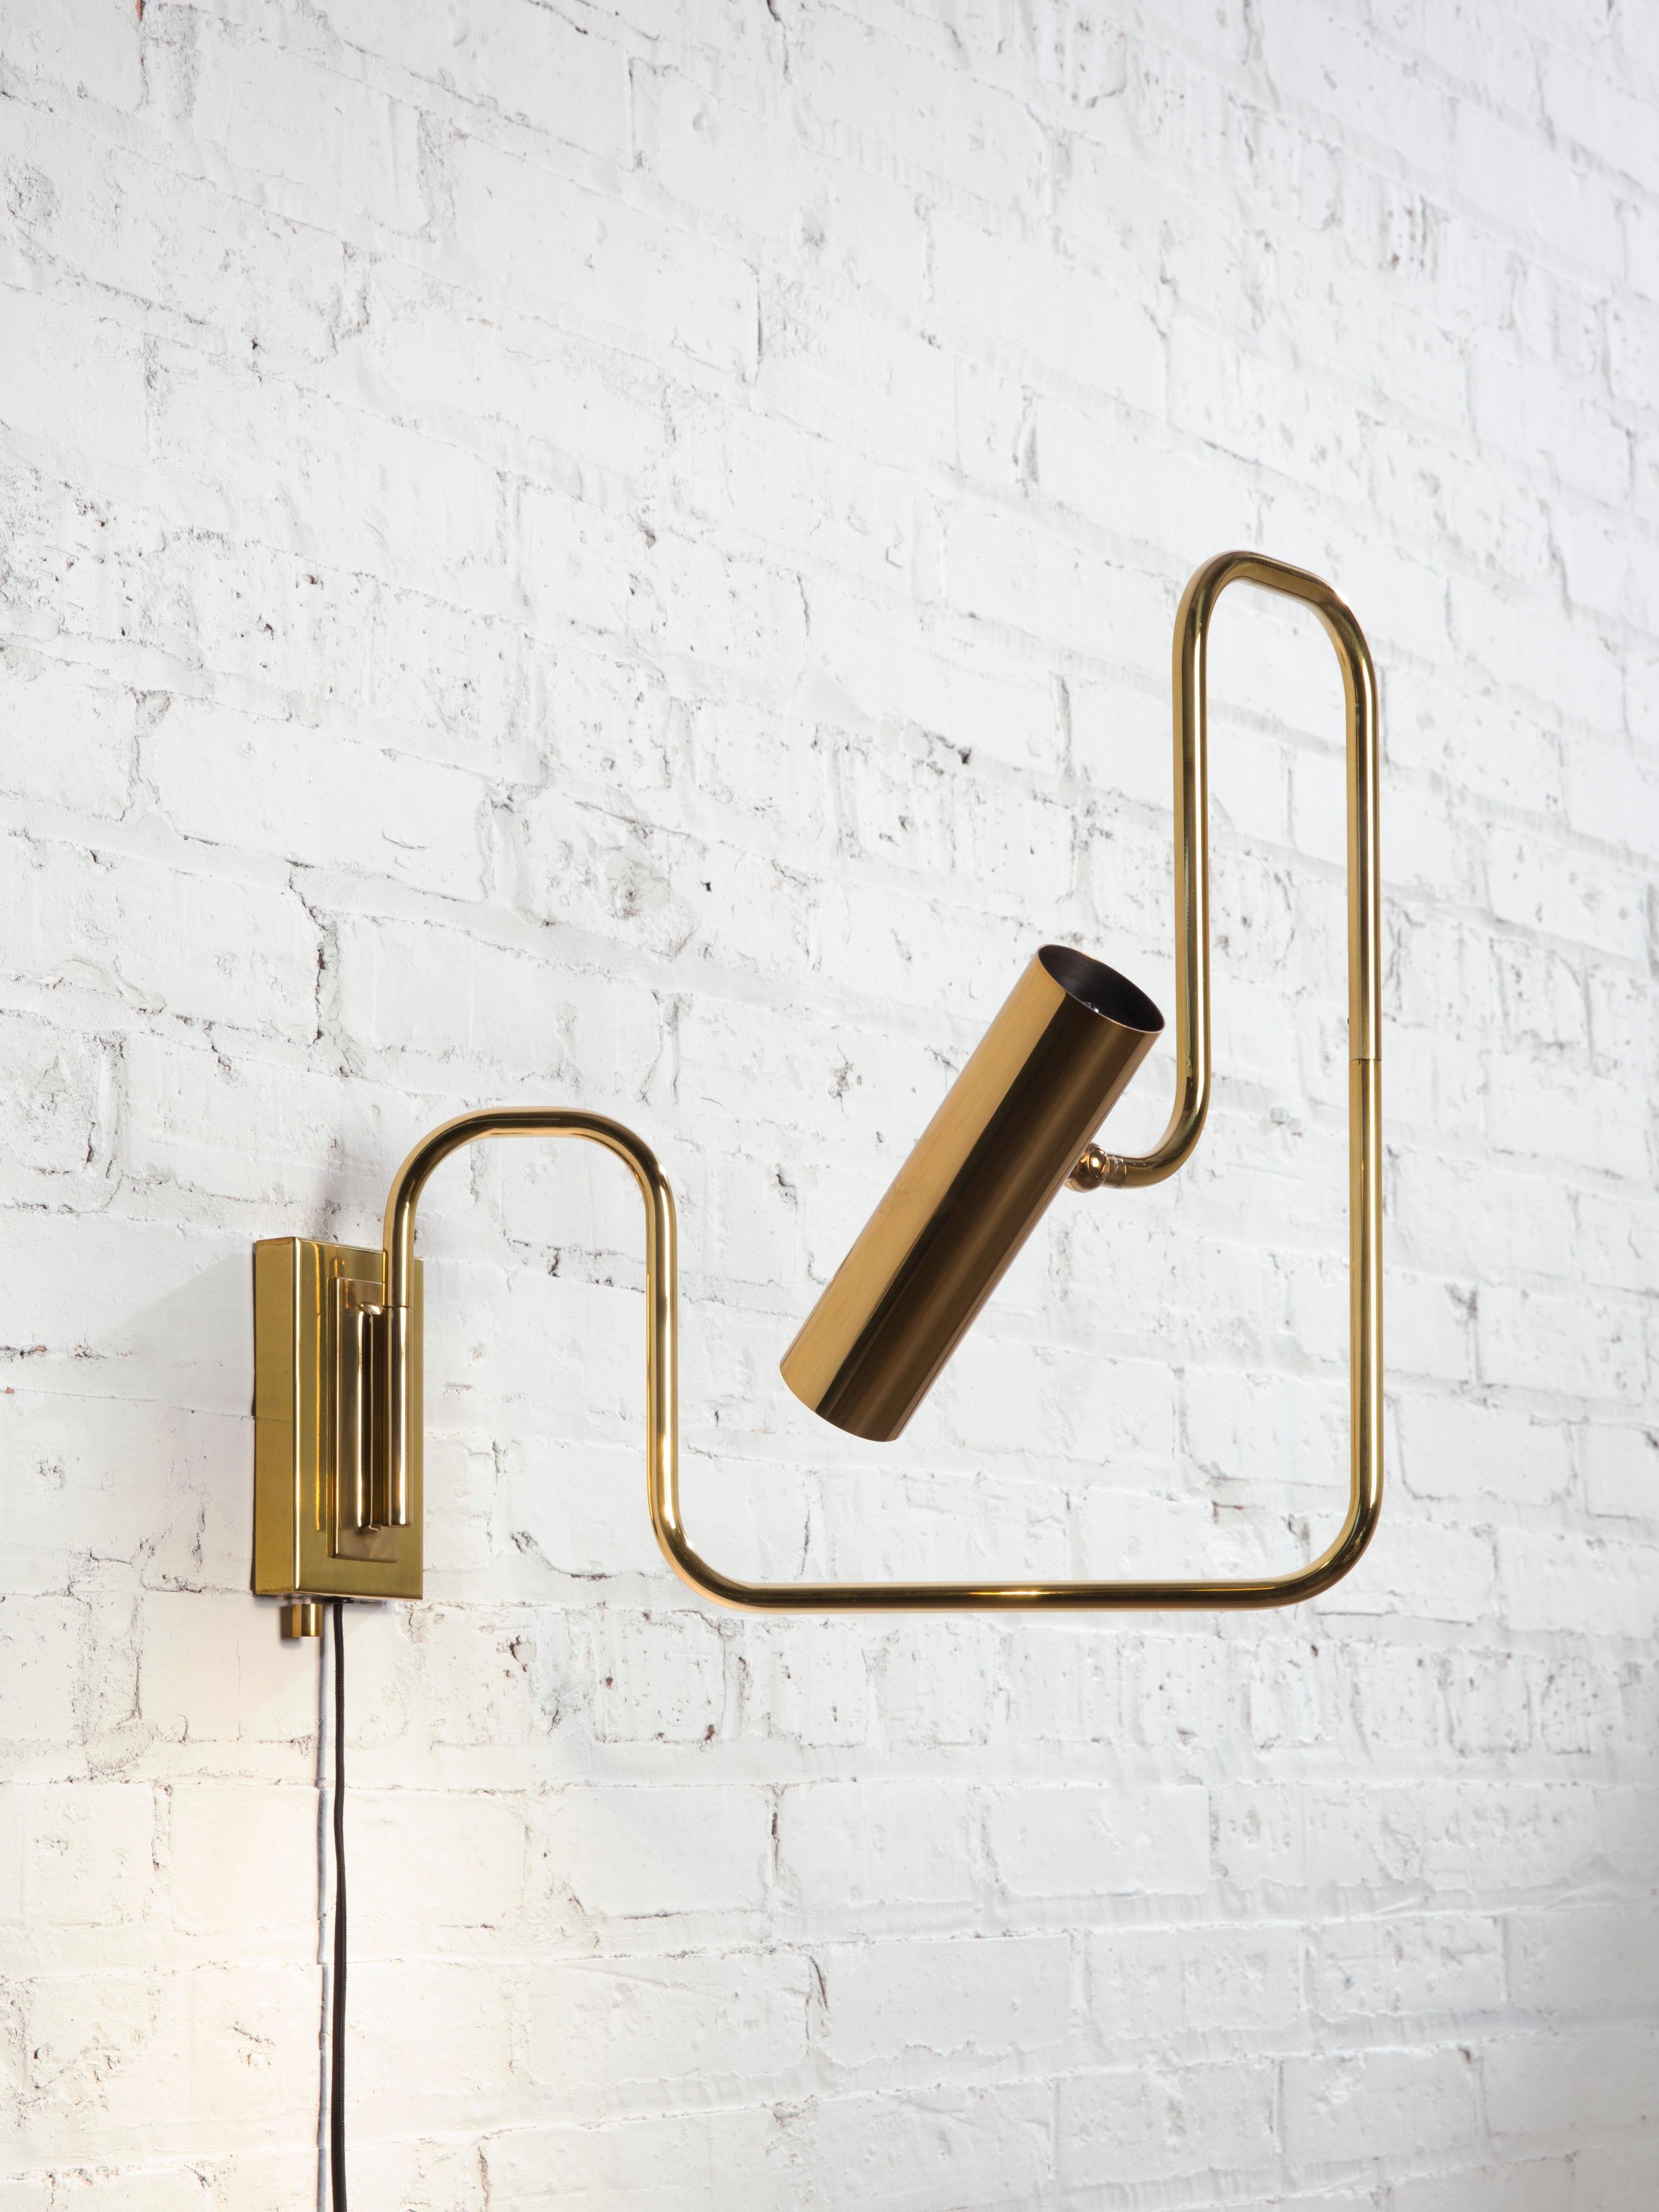 Pivot single wall lamp by Gentner Design.
Dimensions: D 40.6 x W 5 x H 39.3 cm.
Materials: polished tarnished brass.
Available in polished tarnished brass, darkened brass and hand rubbed brass.

All our lamps can be wired according to each